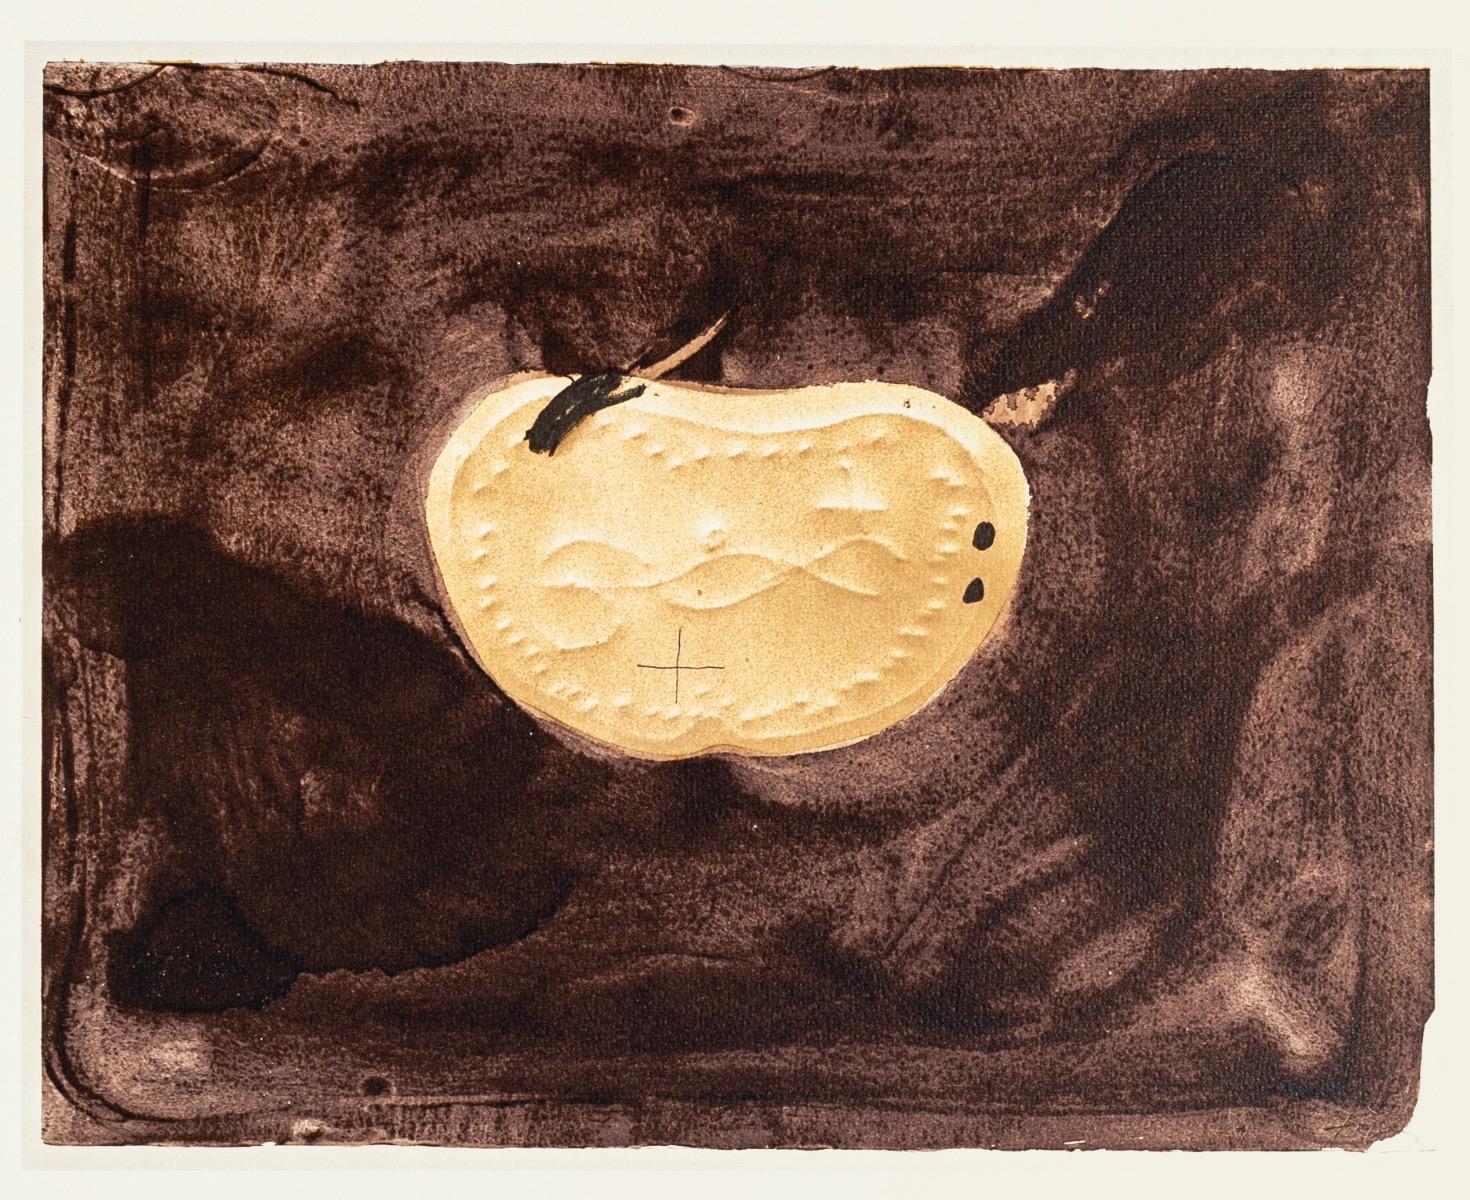 Pectoral is a vintage offset print artwork after Antoni Tàpies, printed on hand made paper.

The artwork is one of the deluxe edition of 1982 limited to 2.000 specimens, reproducing Tapies' works. Signed on the plate. Titled on the rear and dated,